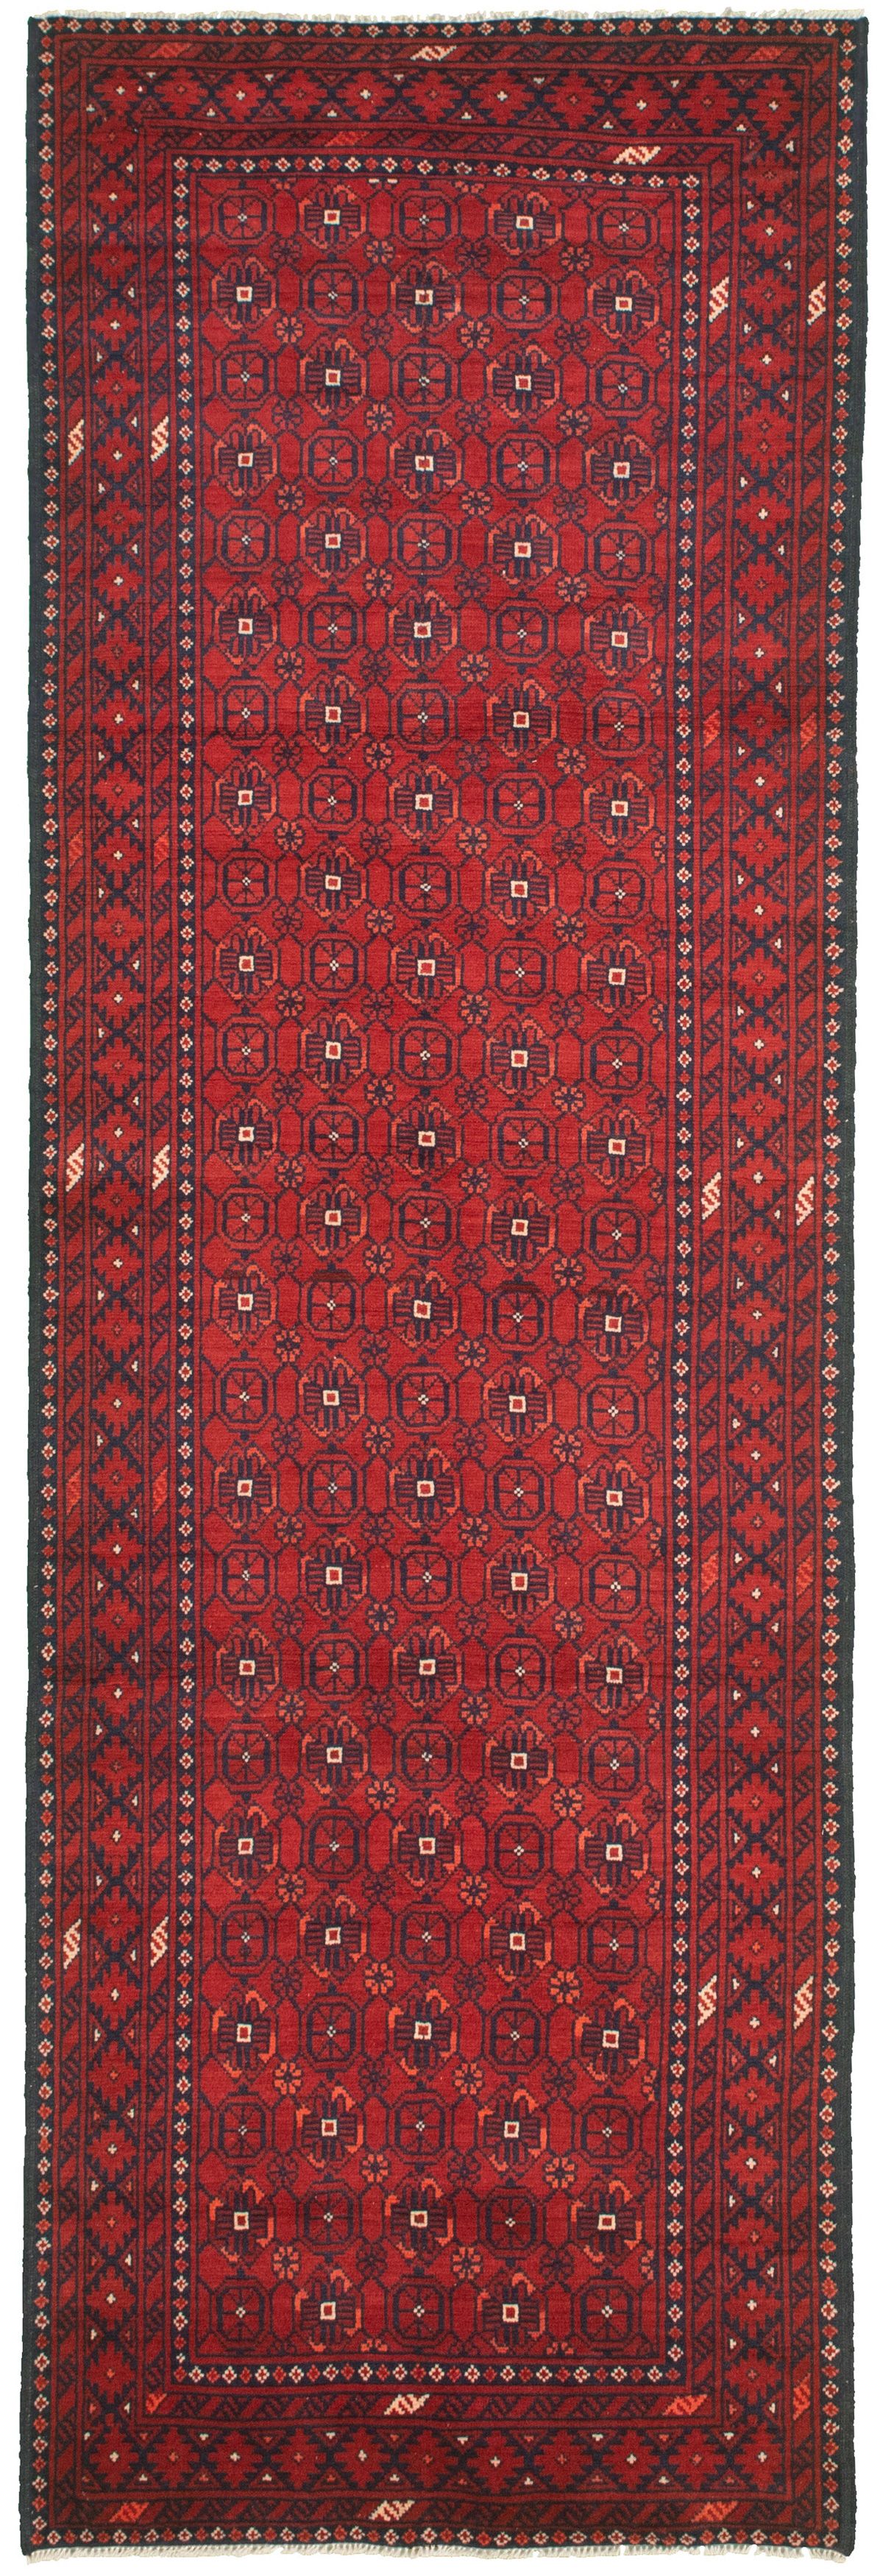 Hand-knotted Finest Khal Mohammadi Red  Rug 2'11" x 9'5"  Size: 2'11" x 9'5"  